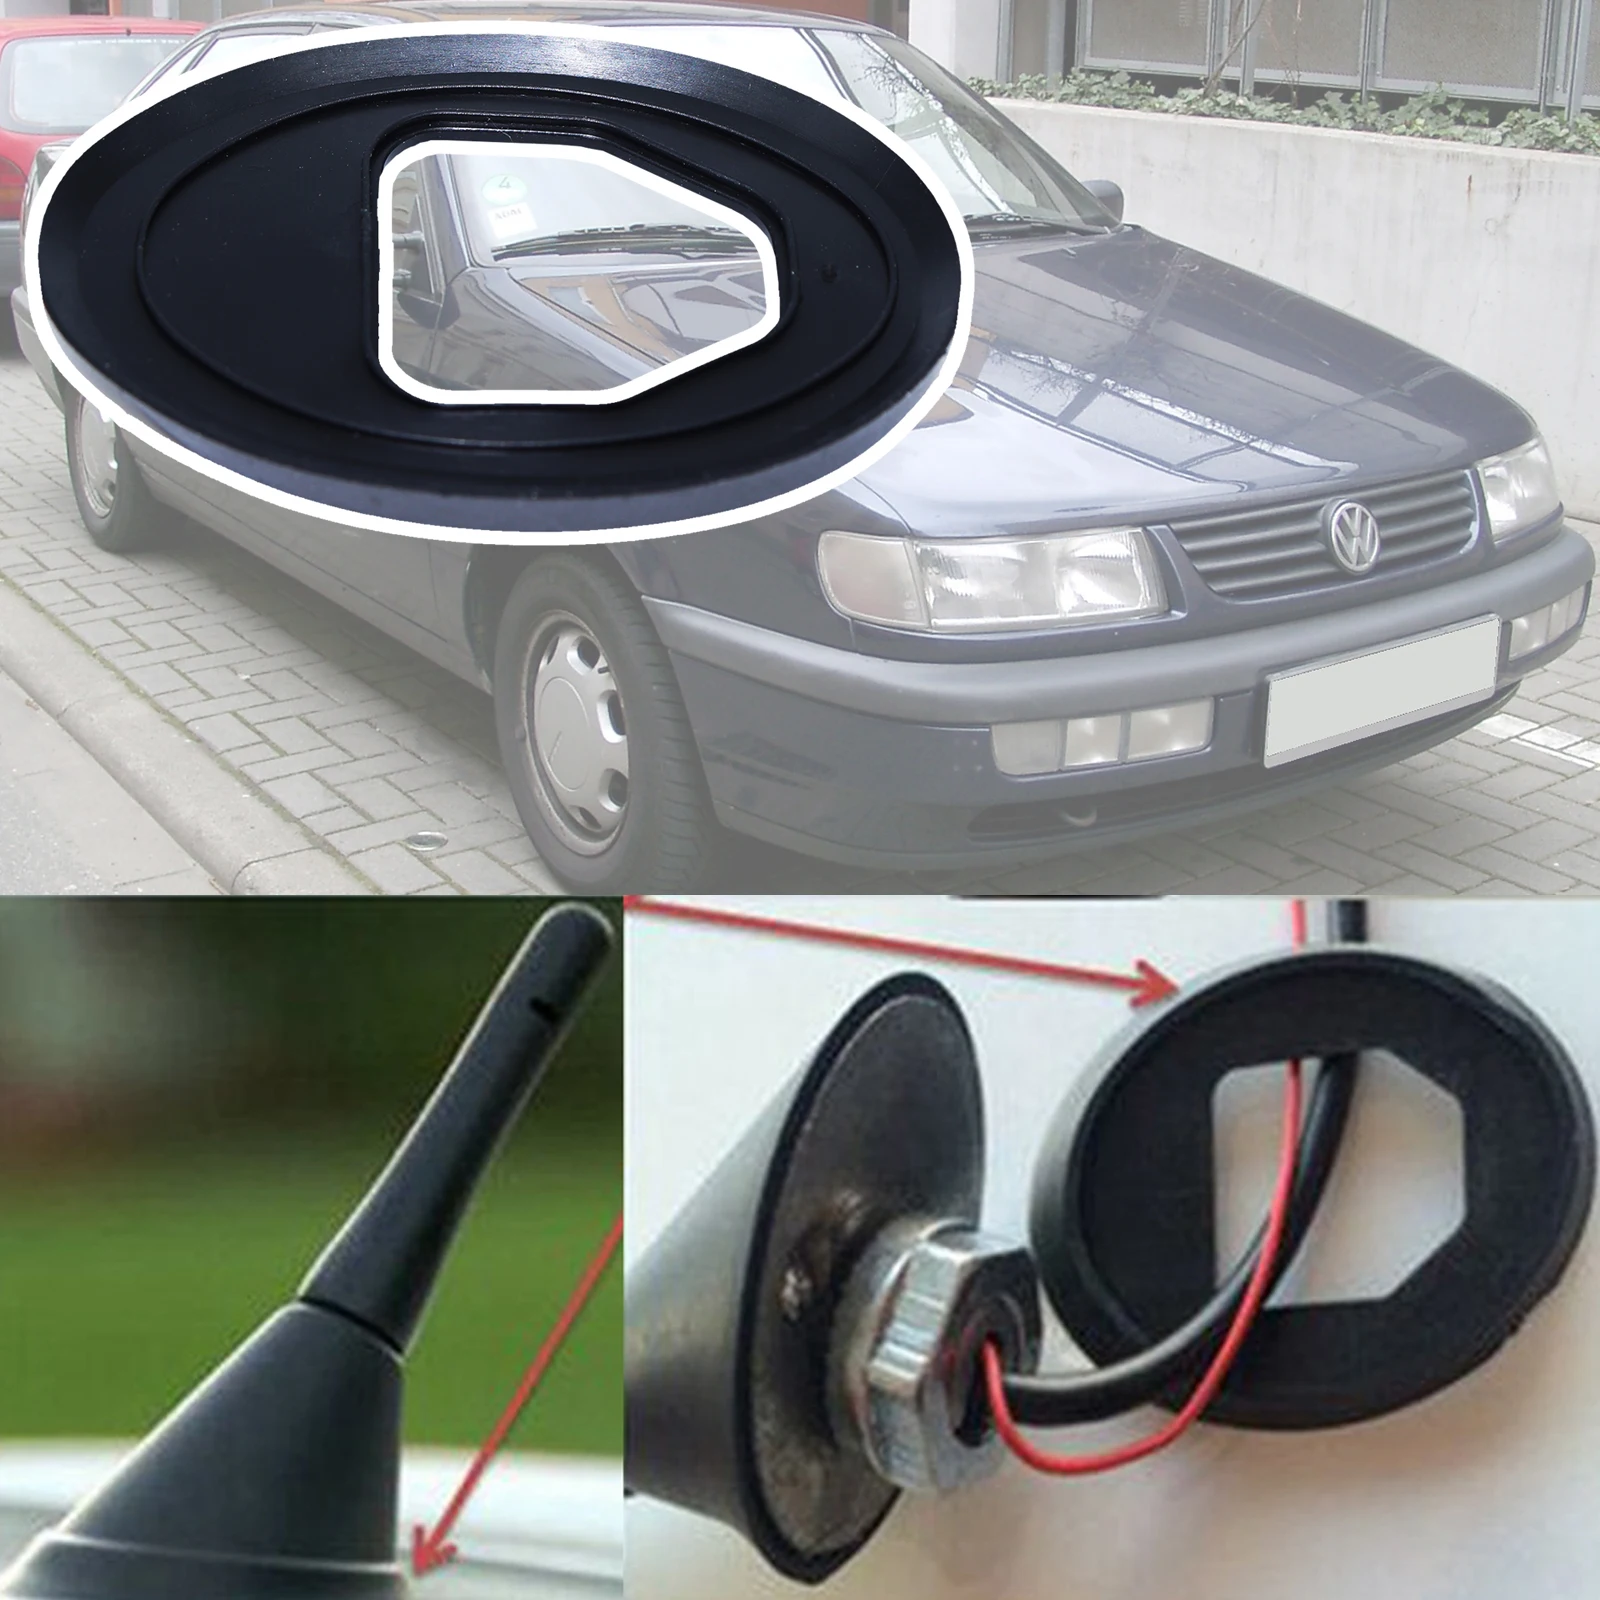 For VW Passat B4 B5.5 1993 1994 1995 1996 1997 - 2005 Car Roof Mast Whip Aerial Antenna Rubber Base Gasket Seal Pad Accessories